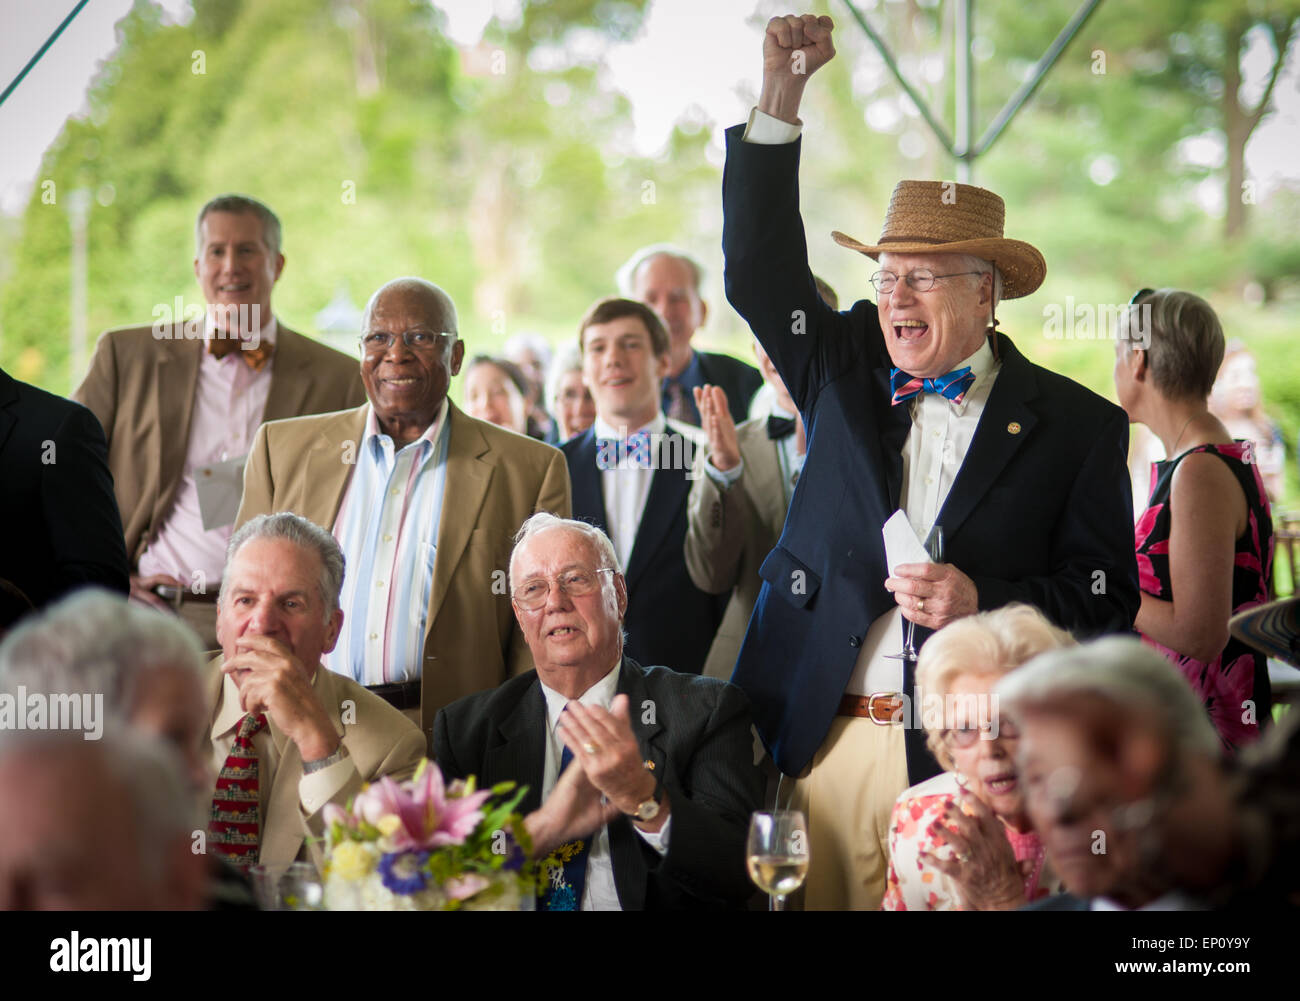 Men cheering while watching horse racing in Baltimore County, MD USA Stock Photo